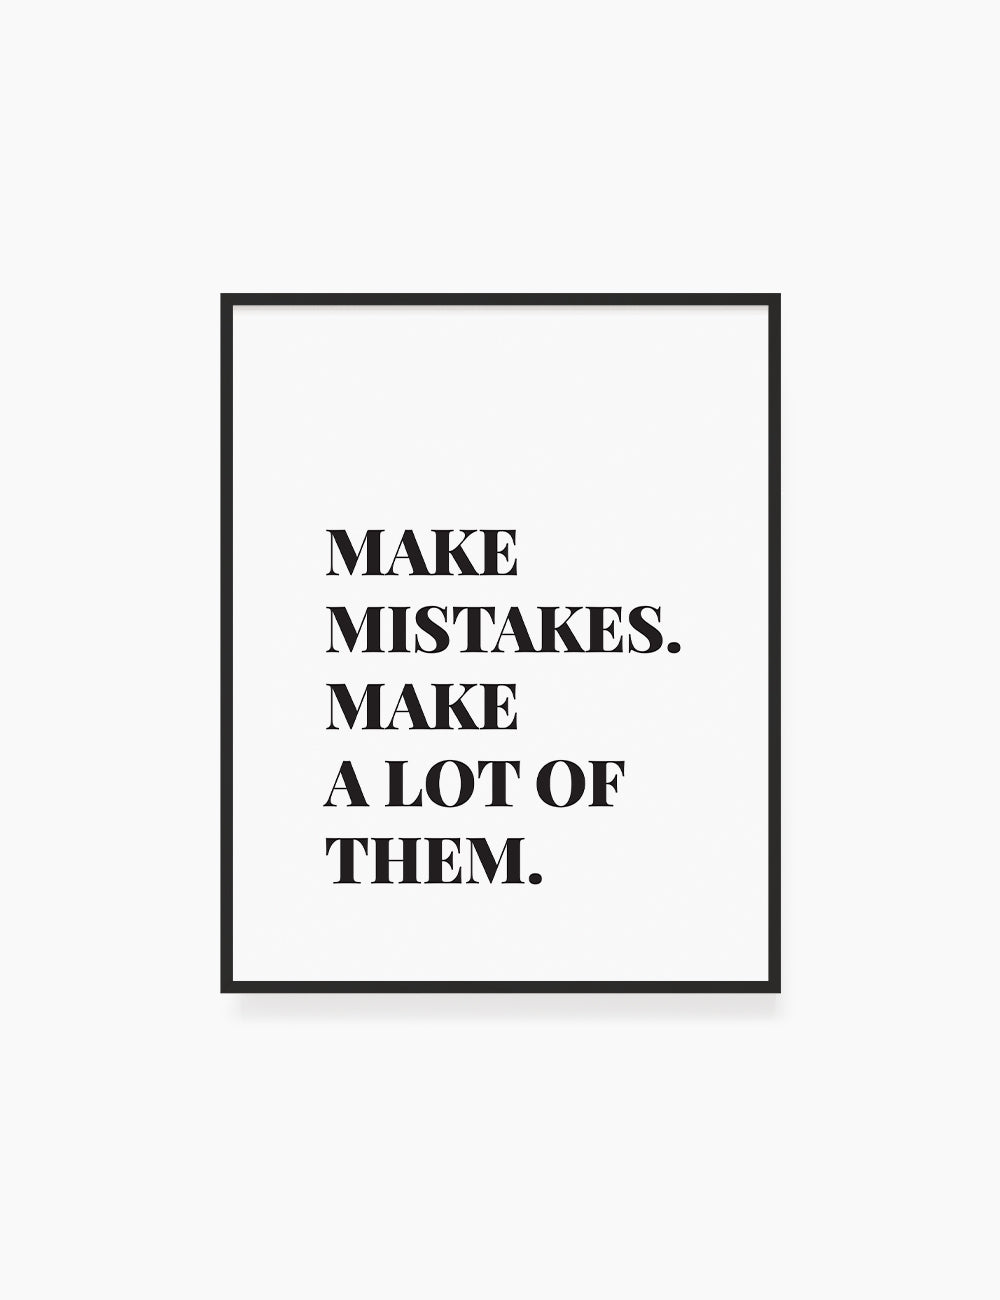 Printable Wall Art Quote: MAKE MISTAKES Printable Poster. Inspirational Quote. Motivational Quote. WA012 - Paper Moon Art & Design